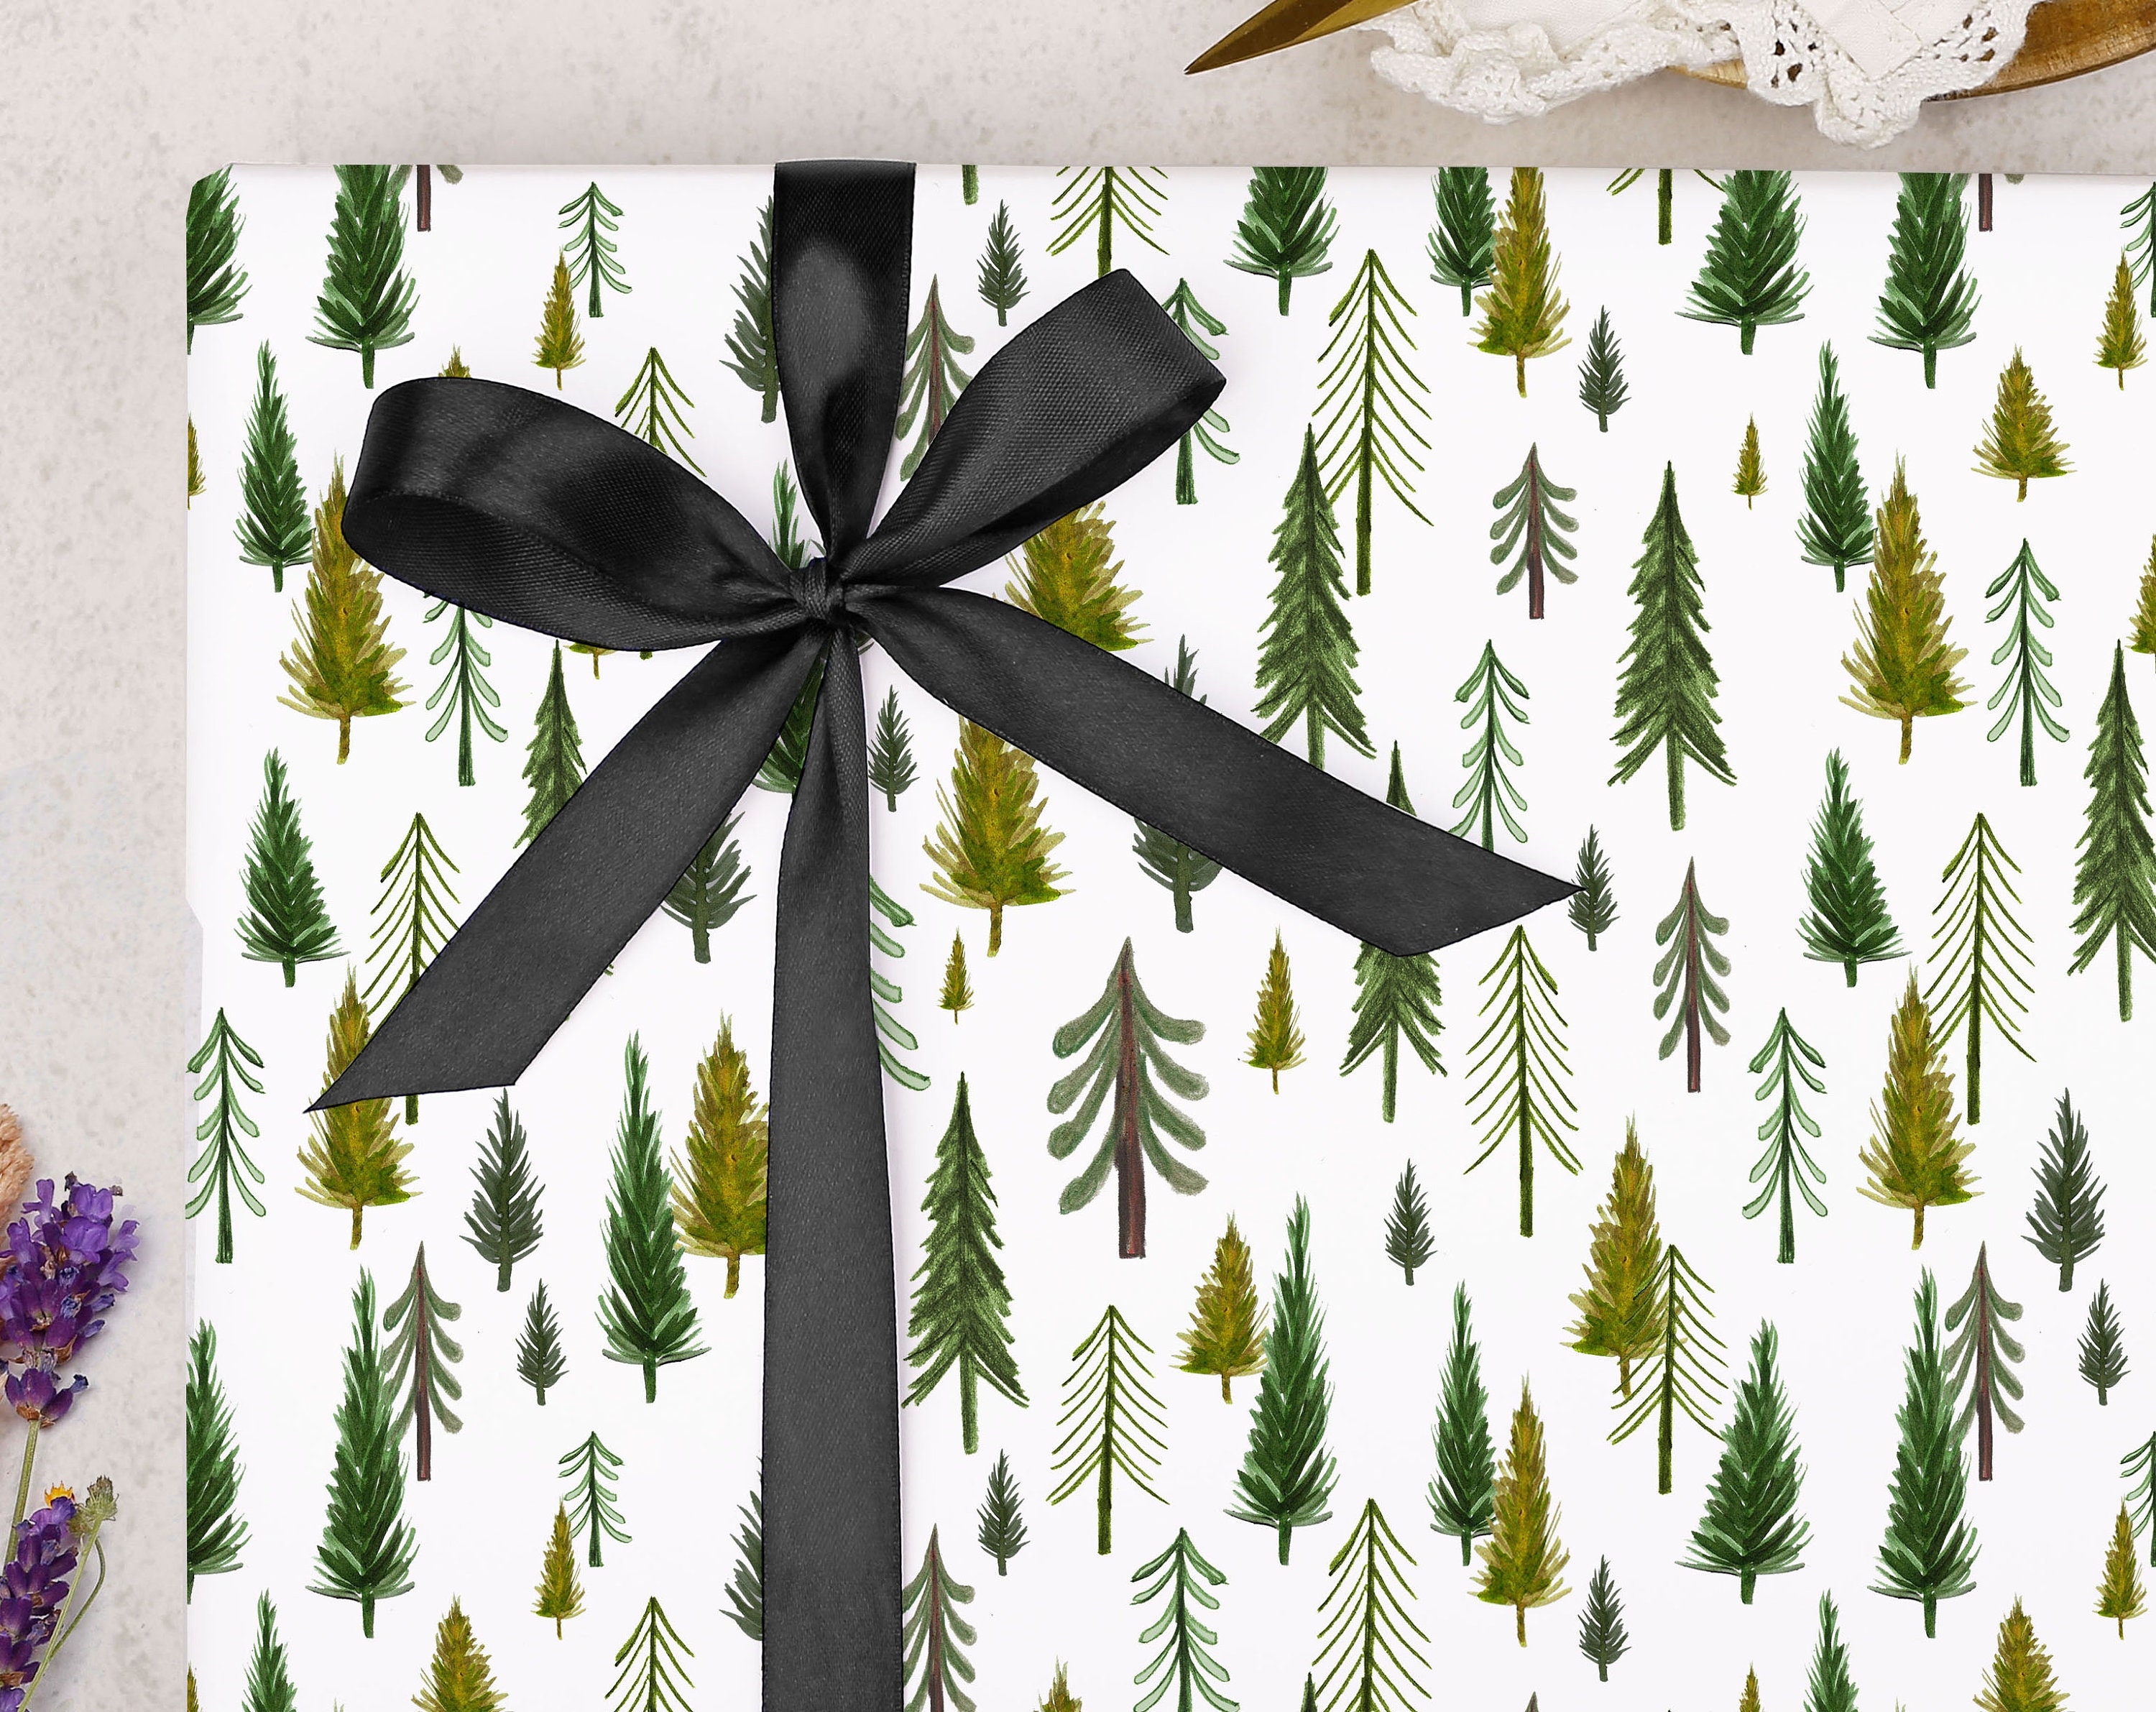 Watercolor forest green snow Christmas pine tree Wrapping Paper by Pink  Water